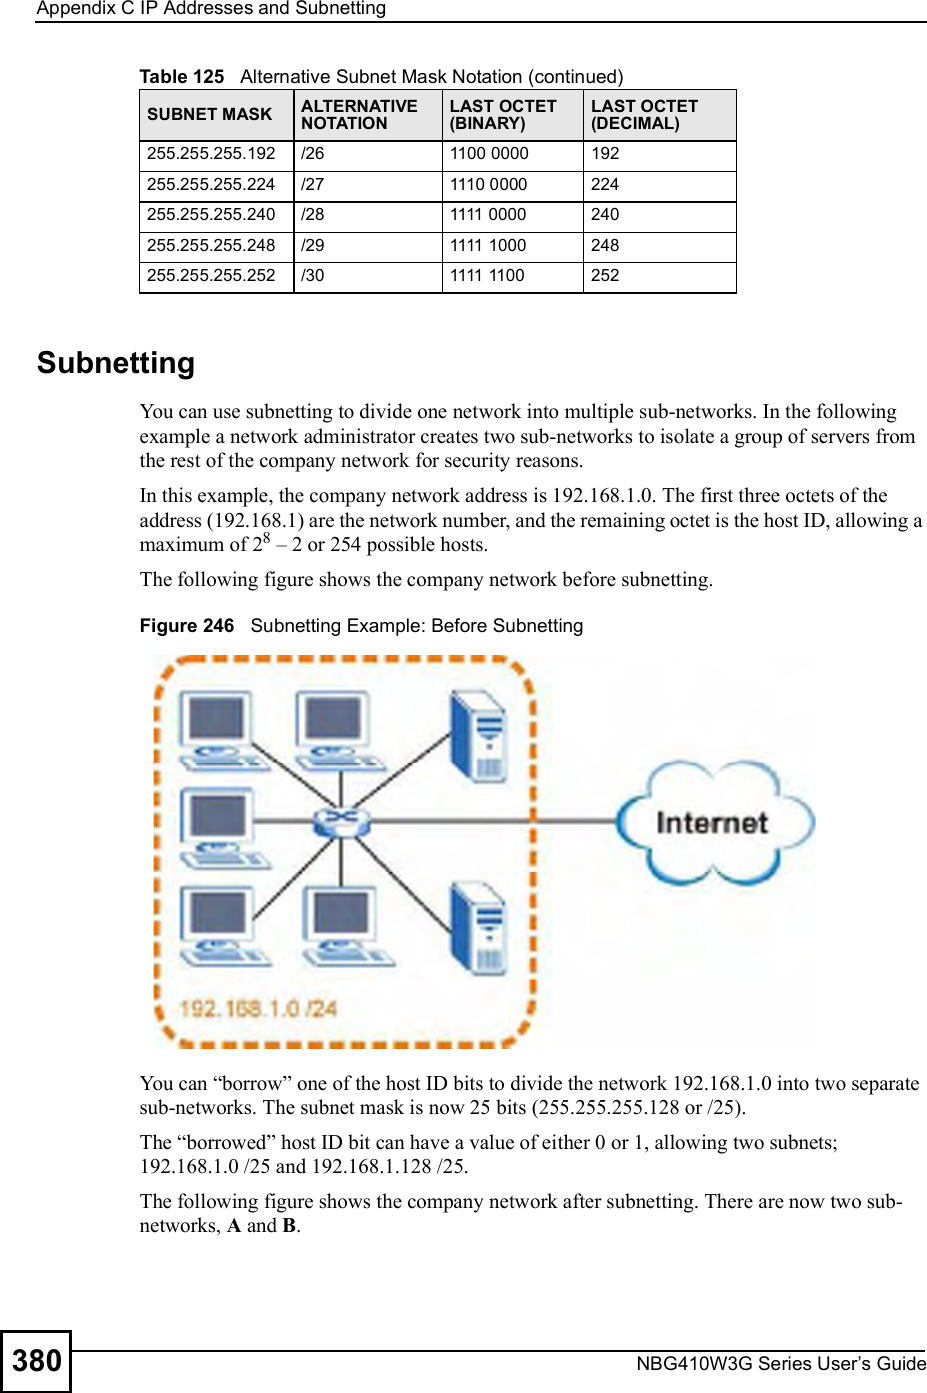 Appendix CIP Addresses and SubnettingNBG410W3G Series User s Guide380SubnettingYou can use subnetting to divide one network into multiple sub-networks. In the following example a network administrator creates two sub-networks to isolate a group of servers from the rest of the company network for security reasons.In this example, the company network address is 192.168.1.0. The first three octets of the address (192.168.1) are the network number, and the remaining octet is the host ID, allowing a maximum of 28 % 2 or 254 possible hosts.The following figure shows the company network before subnetting.  Figure 246   Subnetting Example: Before SubnettingYou can &quot;borrow# one of the host ID bits to divide the network 192.168.1.0 into two separate sub-networks. The subnet mask is now 25 bits (255.255.255.128 or /25).The &quot;borrowed# host ID bit can have a value of either 0 or 1, allowing two subnets; 192.168.1.0 /25 and 192.168.1.128 /25. The following figure shows the company network after subnetting. There are now two sub-networks, A and B. 255.255.255.192 /26 1100 0000 192255.255.255.224 /27 1110 0000 224255.255.255.240 /28 1111 0000 240255.255.255.248 /29 1111 1000 248255.255.255.252 /30 1111 1100 252Table 125   Alternative Subnet Mask Notation (continued)SUBNET MASK ALTERNATIVE NOTATIONLAST OCTET (BINARY)LAST OCTET (DECIMAL)